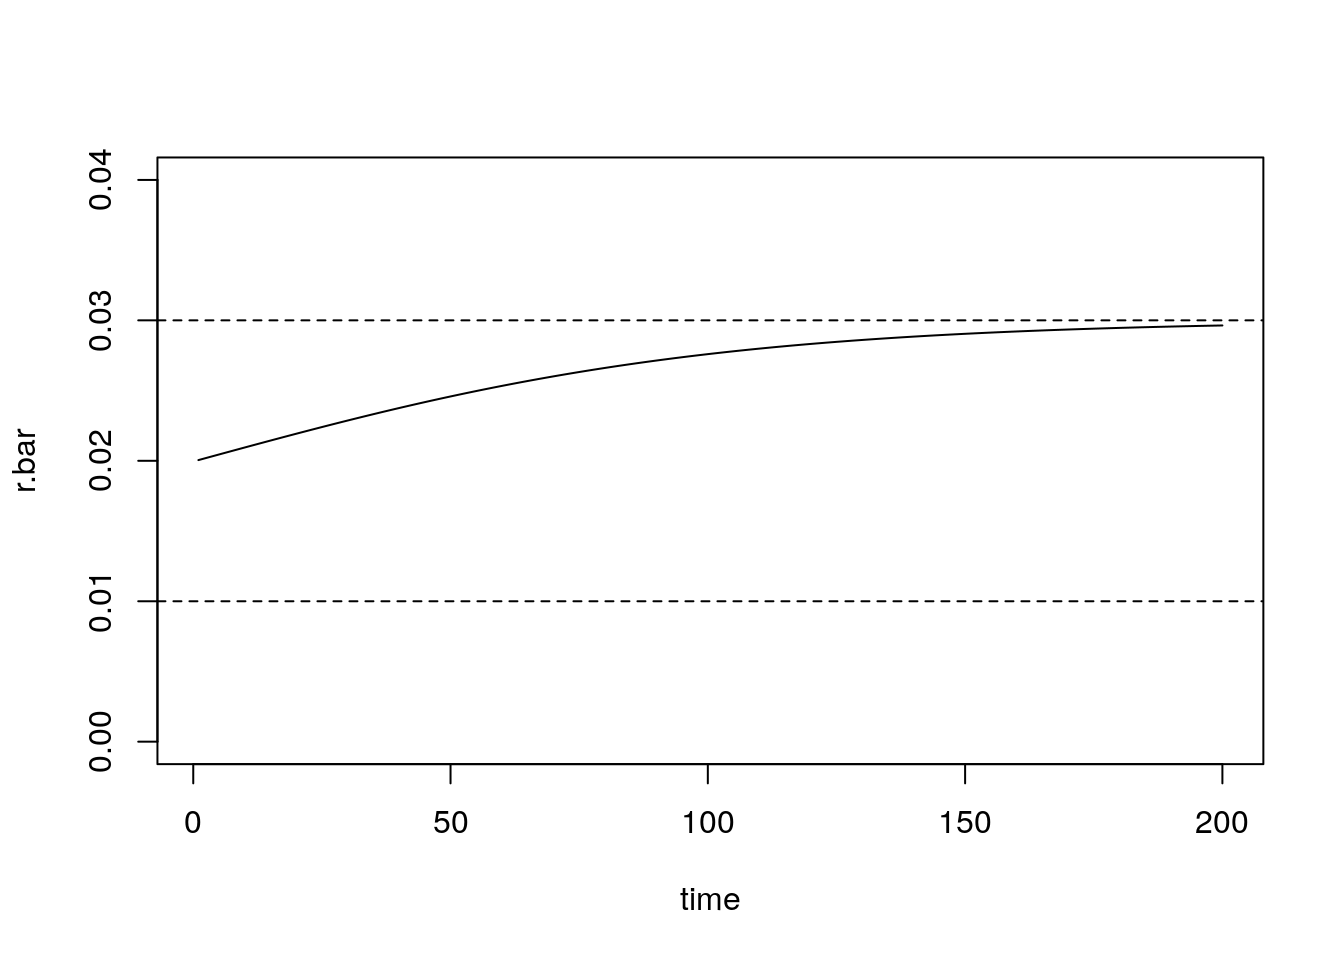 Aggregate growth rate of sub-populations A + B